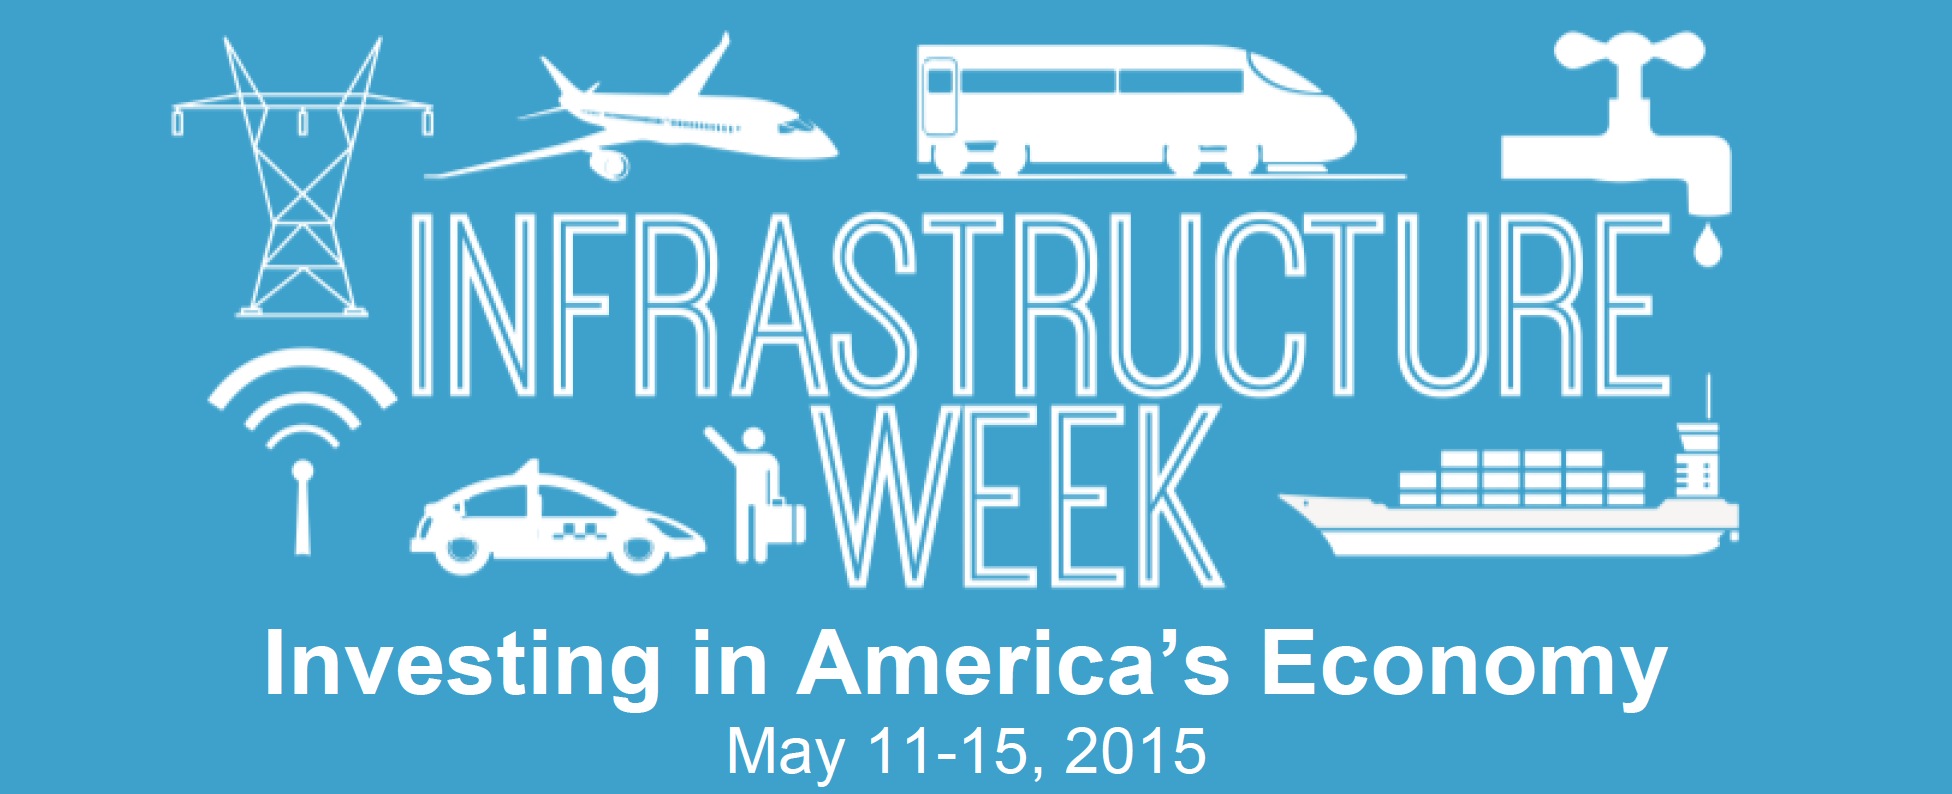 Infrastructure Week 2015: May 11 -15